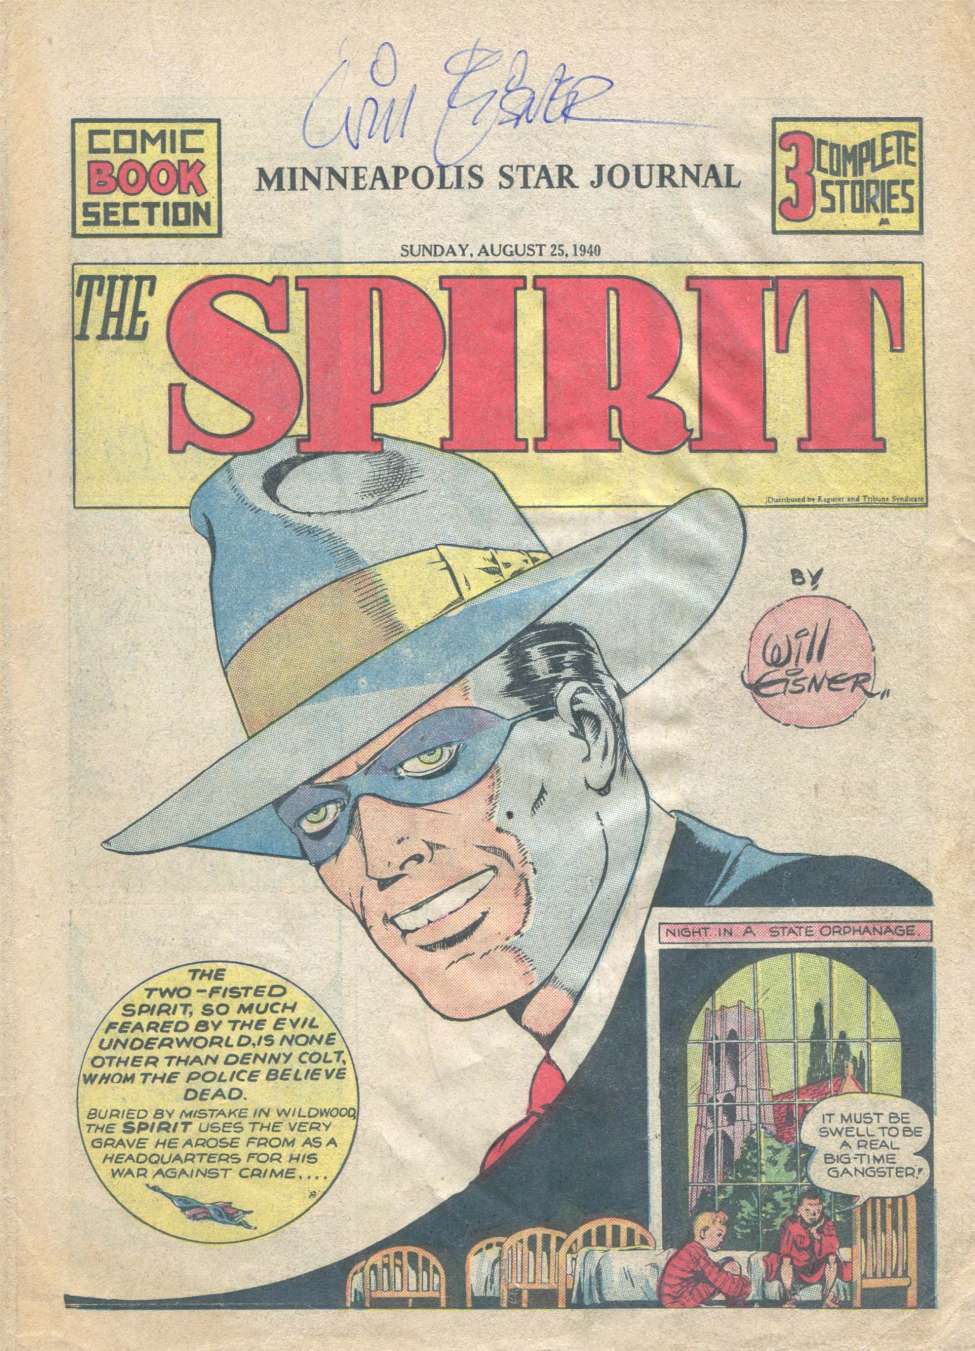 Comic Book Cover For The Spirit (1940-08-25) - Minneapolis Star Journal